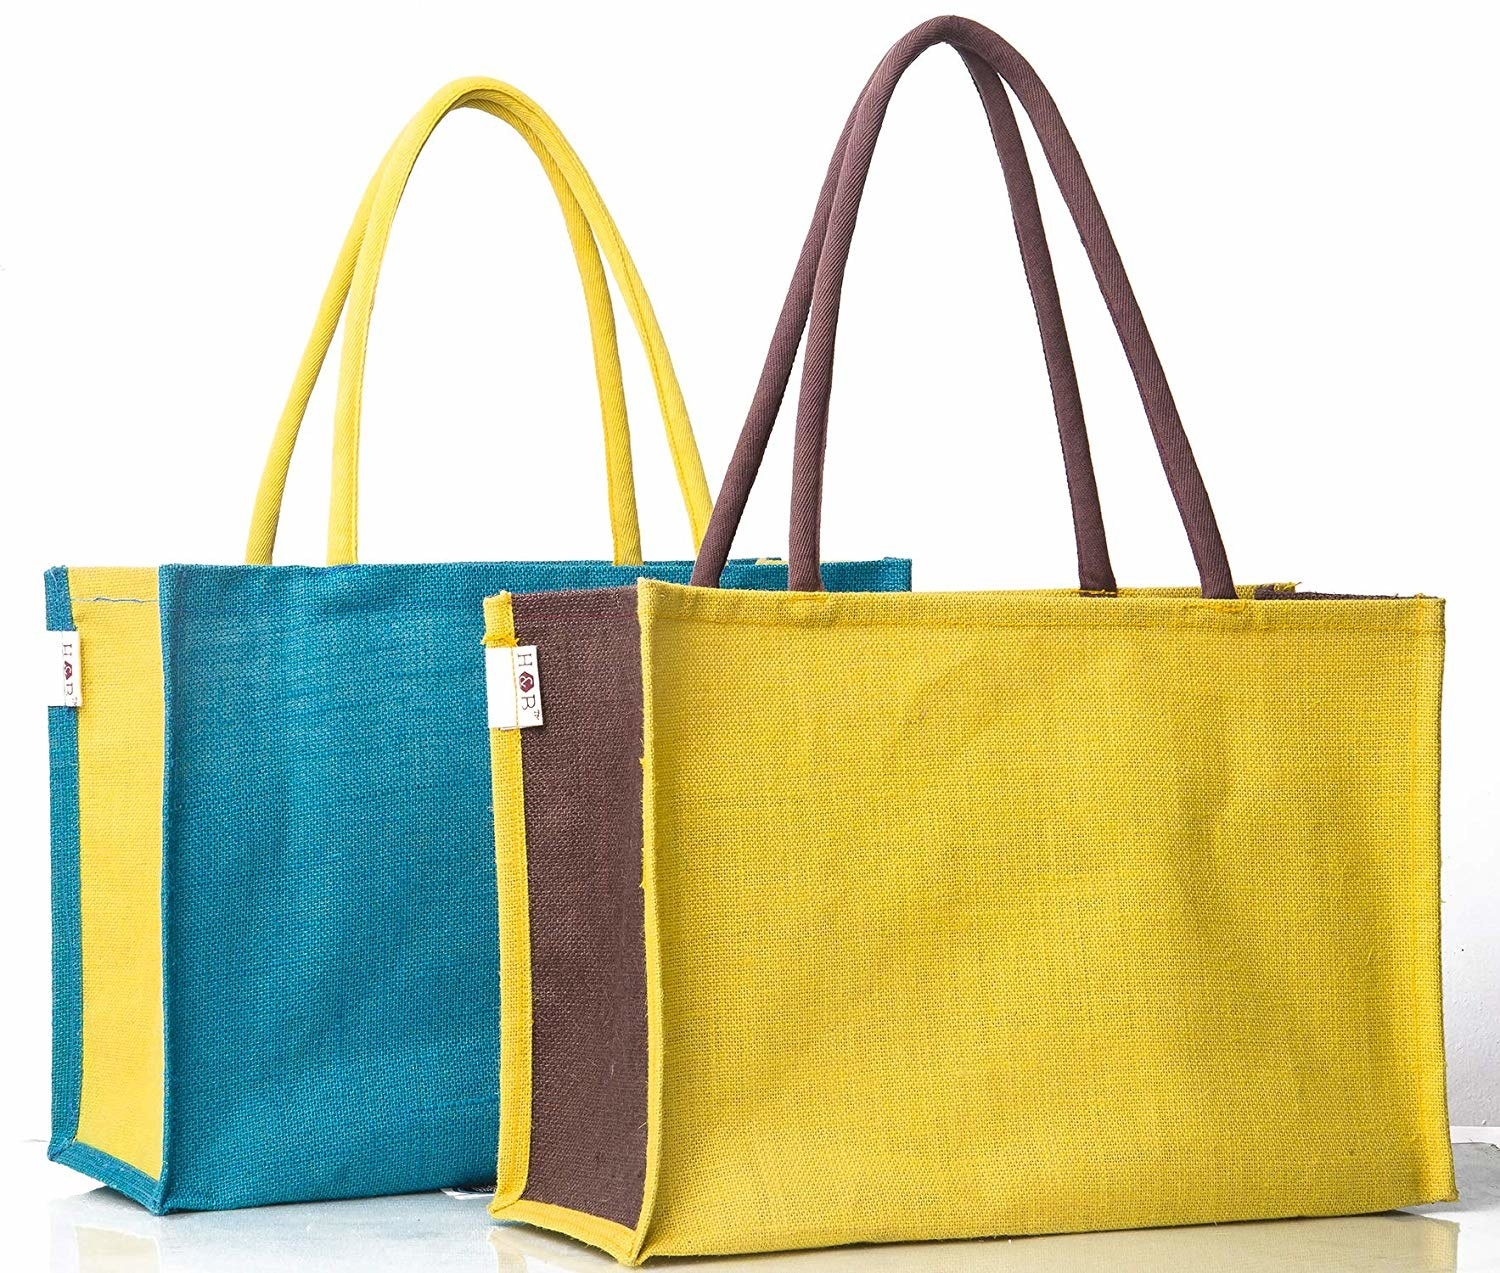 Two tote bags in the colour teal and yellow, and yellow and grey.